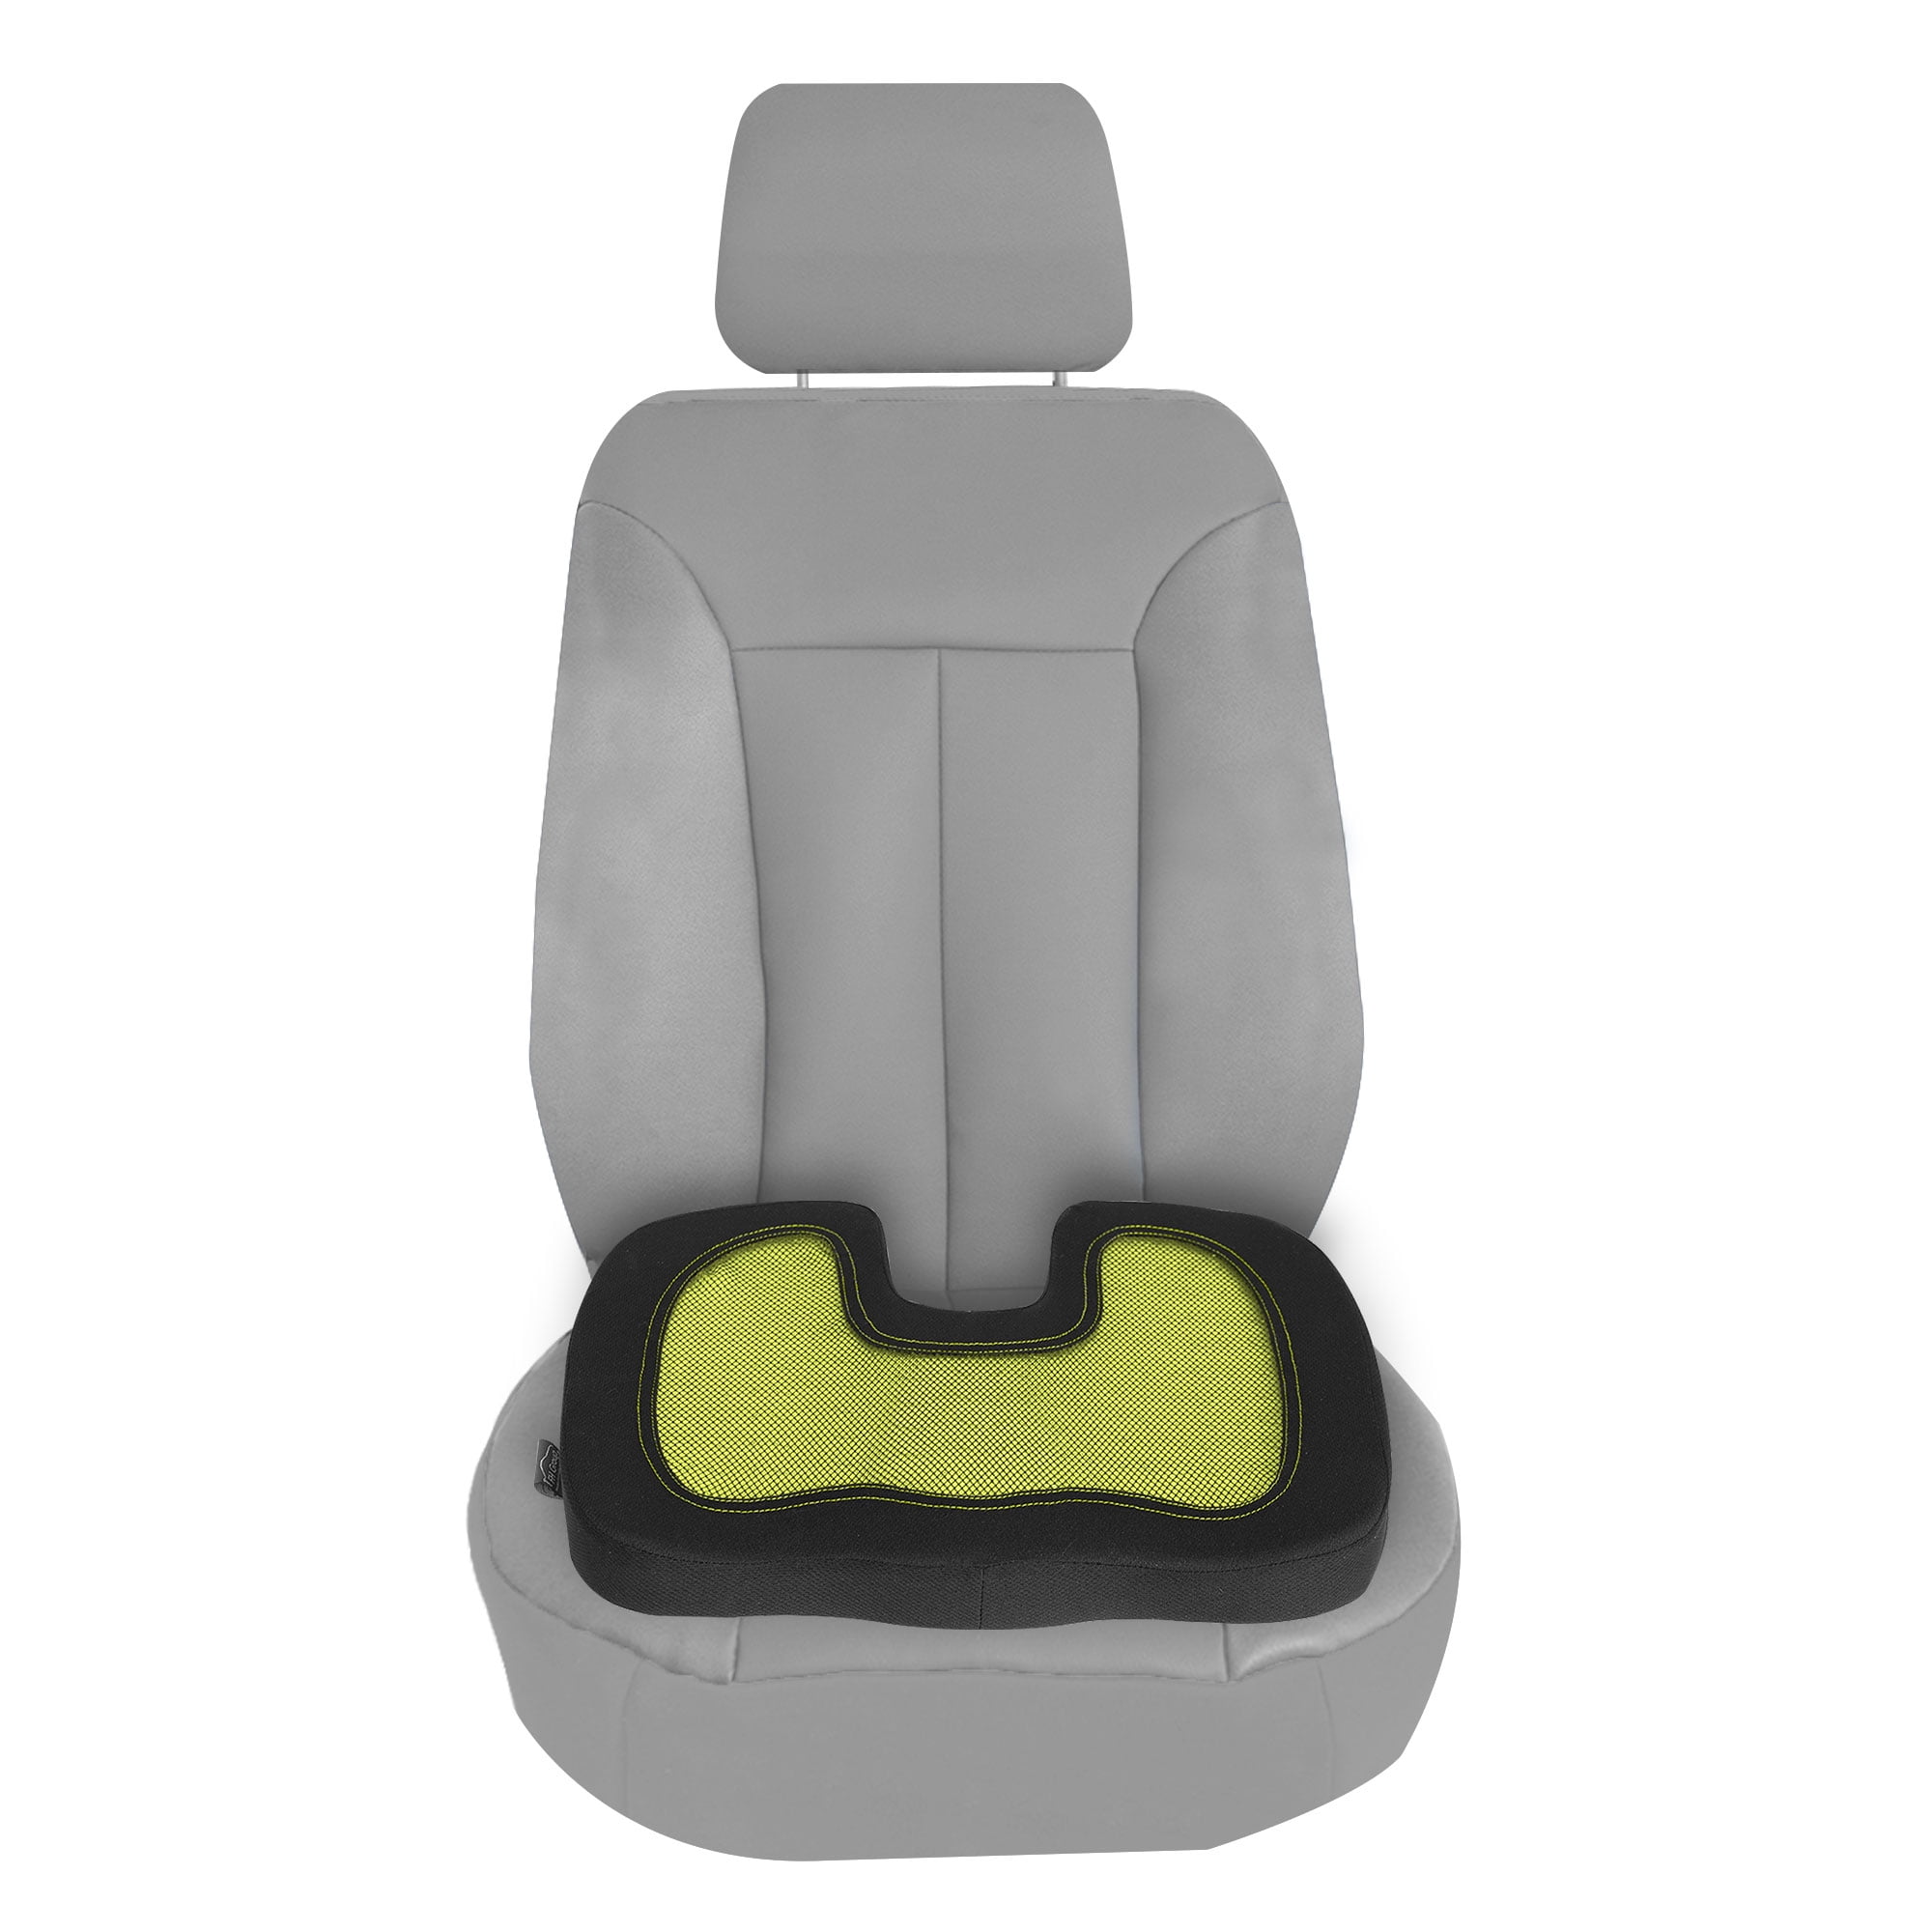 SWISS DRIVE CAR SEAT CUSHION WITH MEMORY FOAM AND COOLING GEL OFFICE HOME